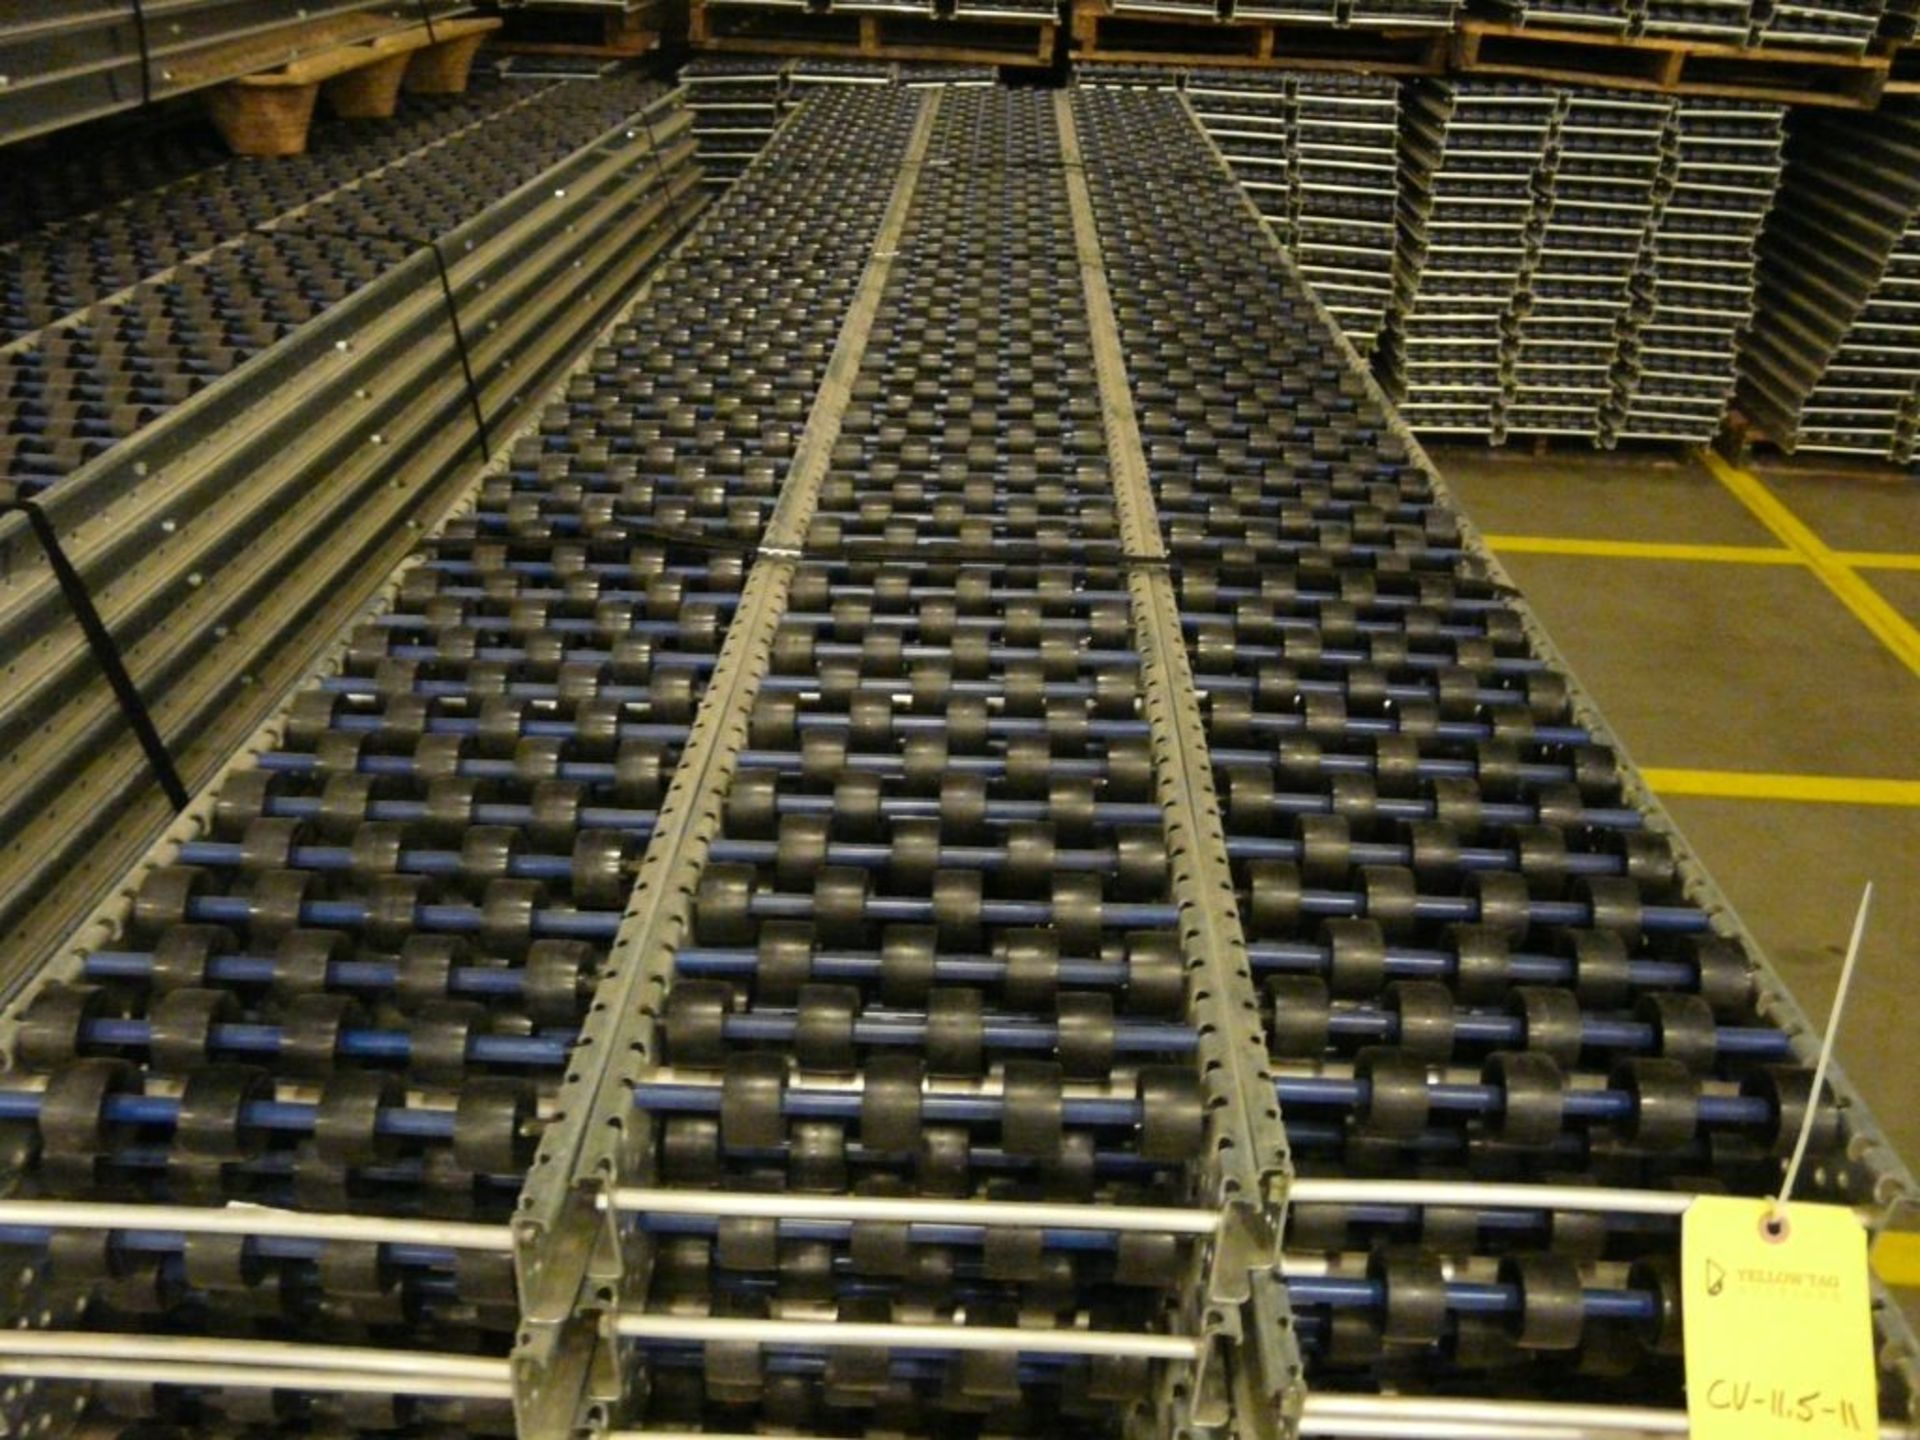 Lot of (90) SpanTrack Wheelbed Carton Flow Conveyors - 11.5'L x 11"W; Tag: 223560 - $30 Lot - Image 3 of 4